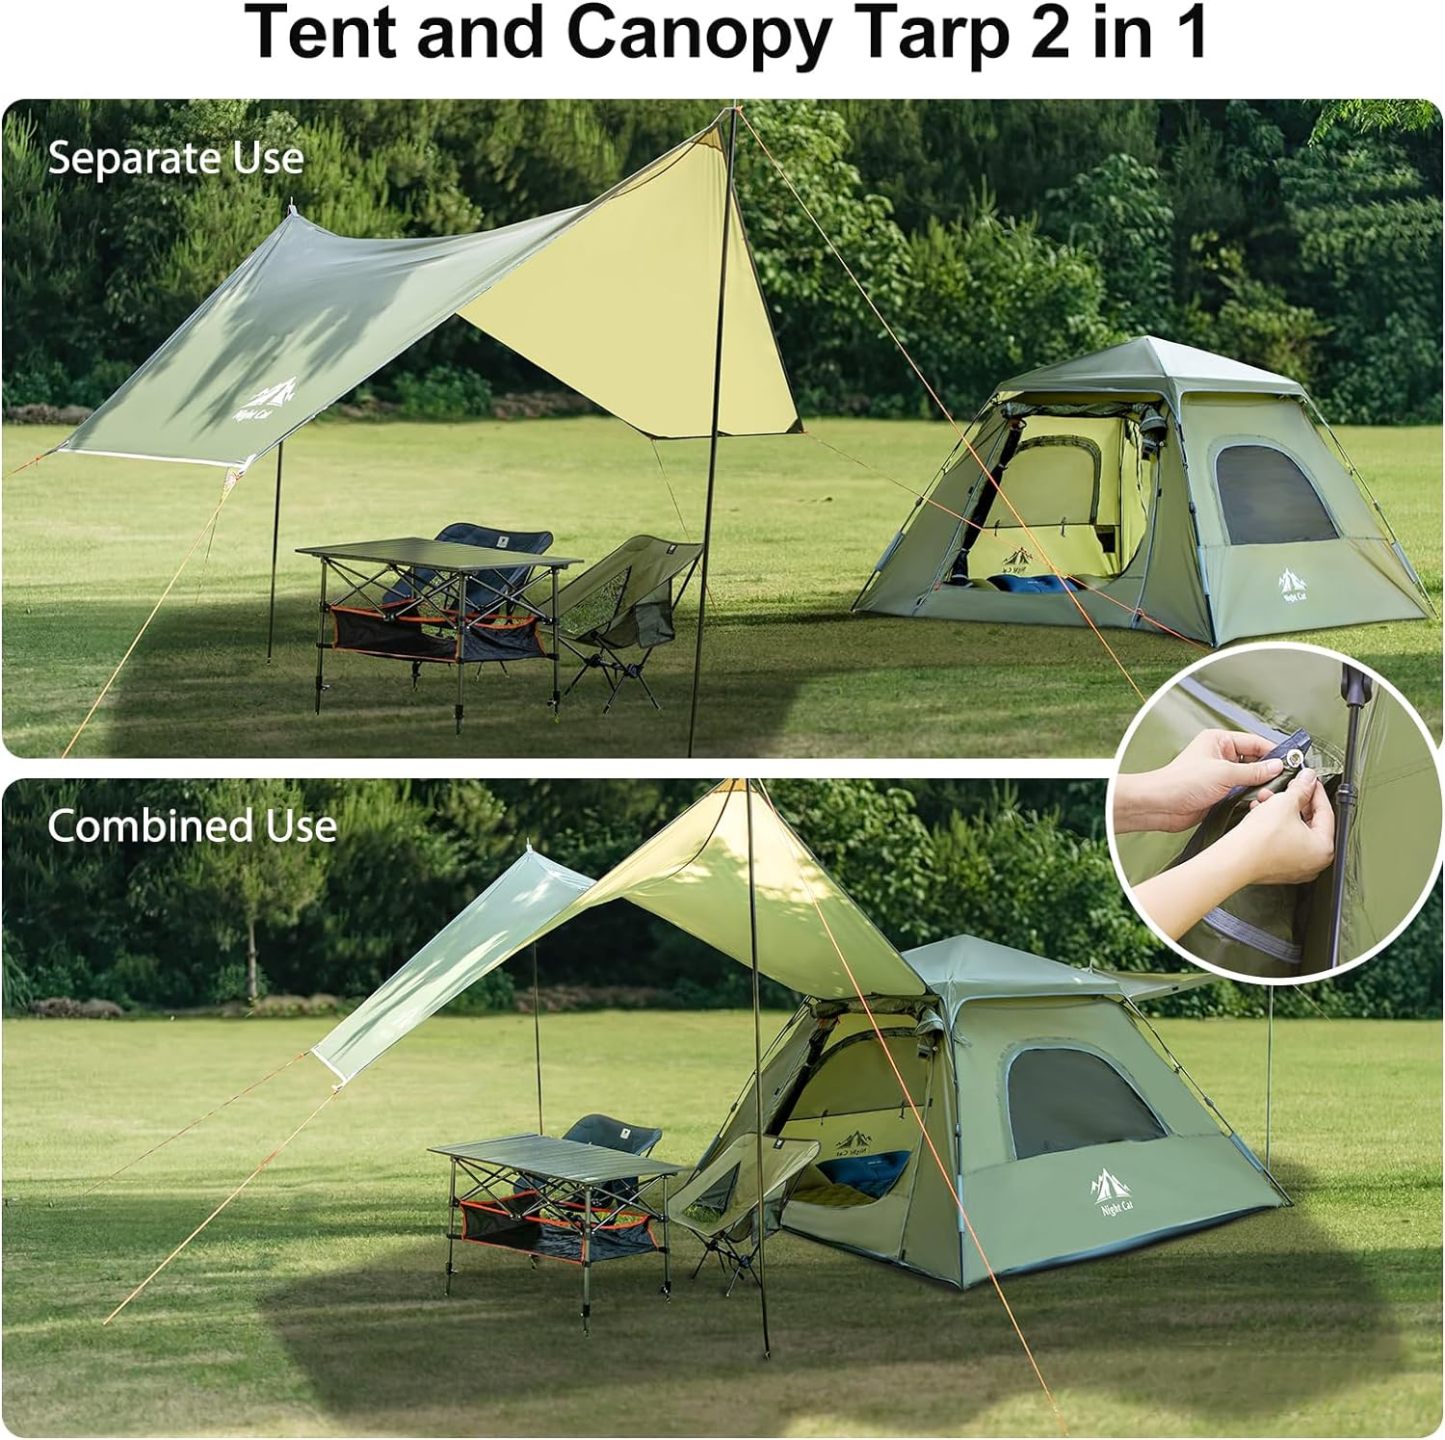 Night Cat Instant Cabin Tent with Canopy Tarp 3 Persons Waterproof Pop Up Tent for Family Camping 2 in 1 Canopy Tent with Porch Automatic Easy Set Up Outdoor